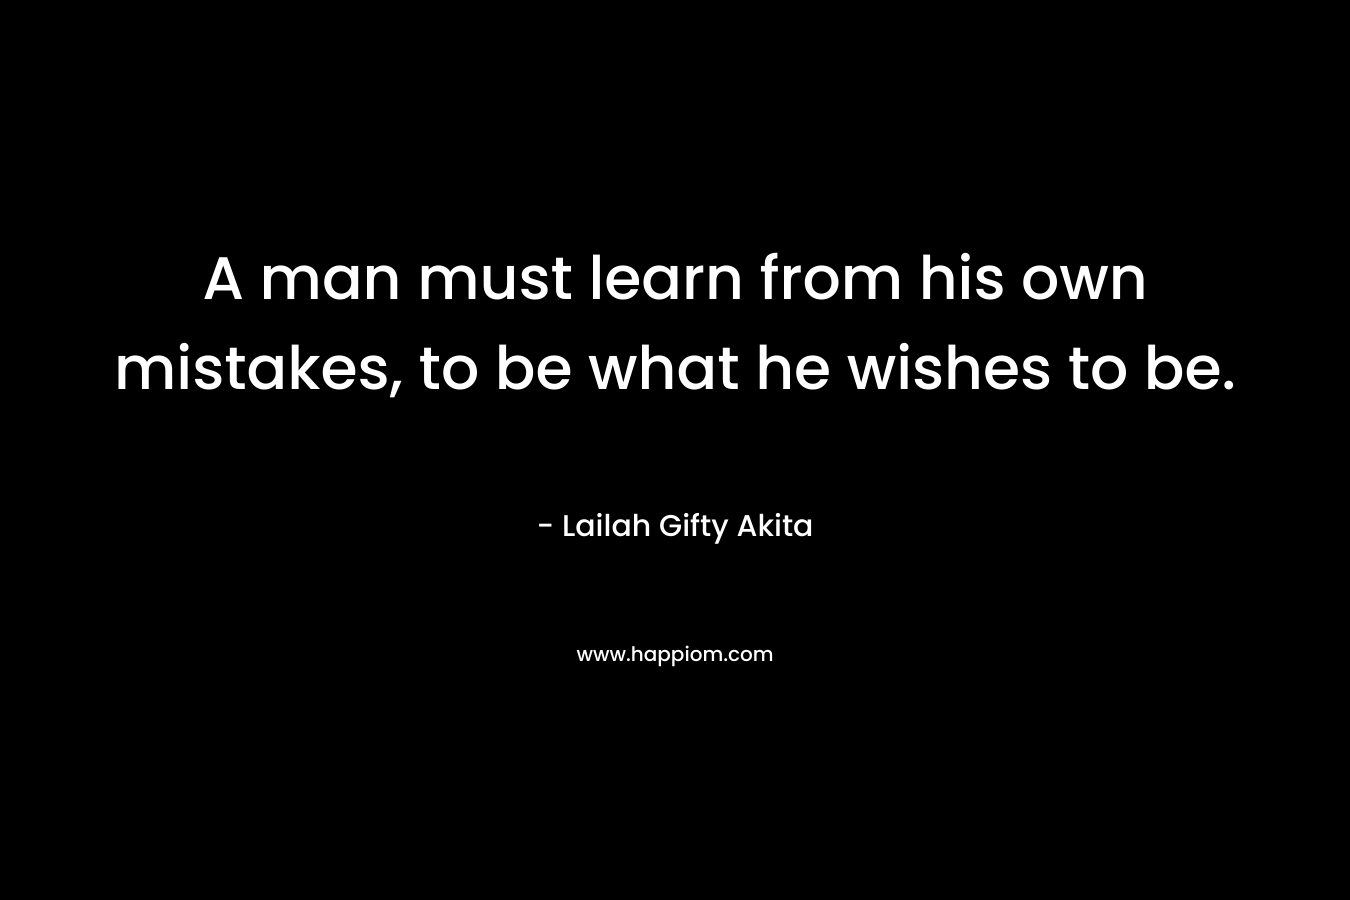 A man must learn from his own mistakes, to be what he wishes to be.